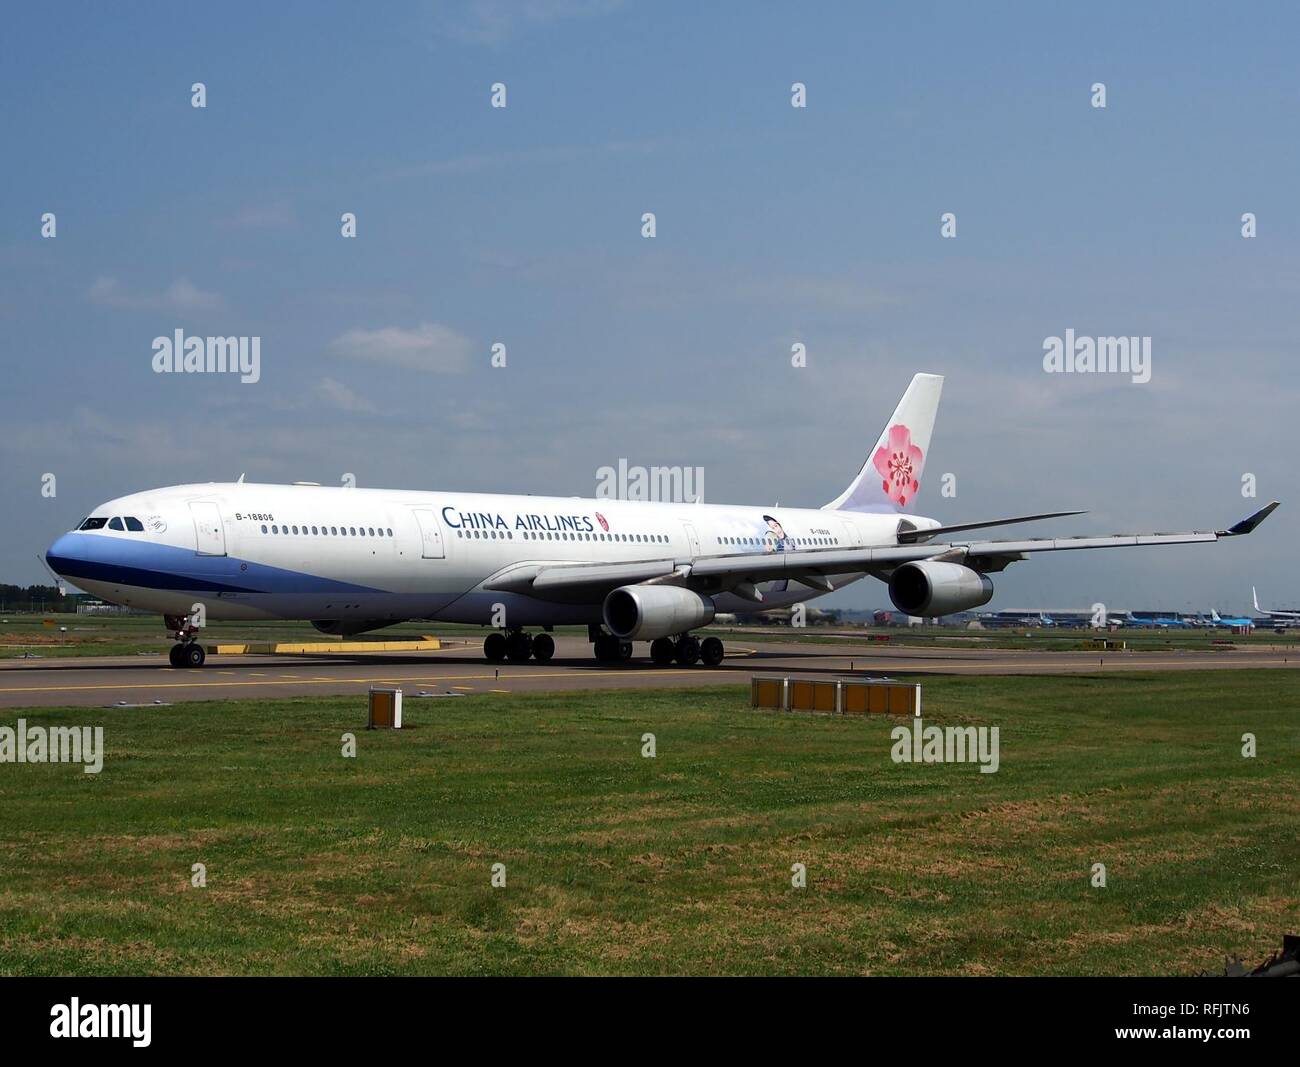 B-18806 China Airlines Airbus A340-313X - cn 433 pic3. Stock Photo